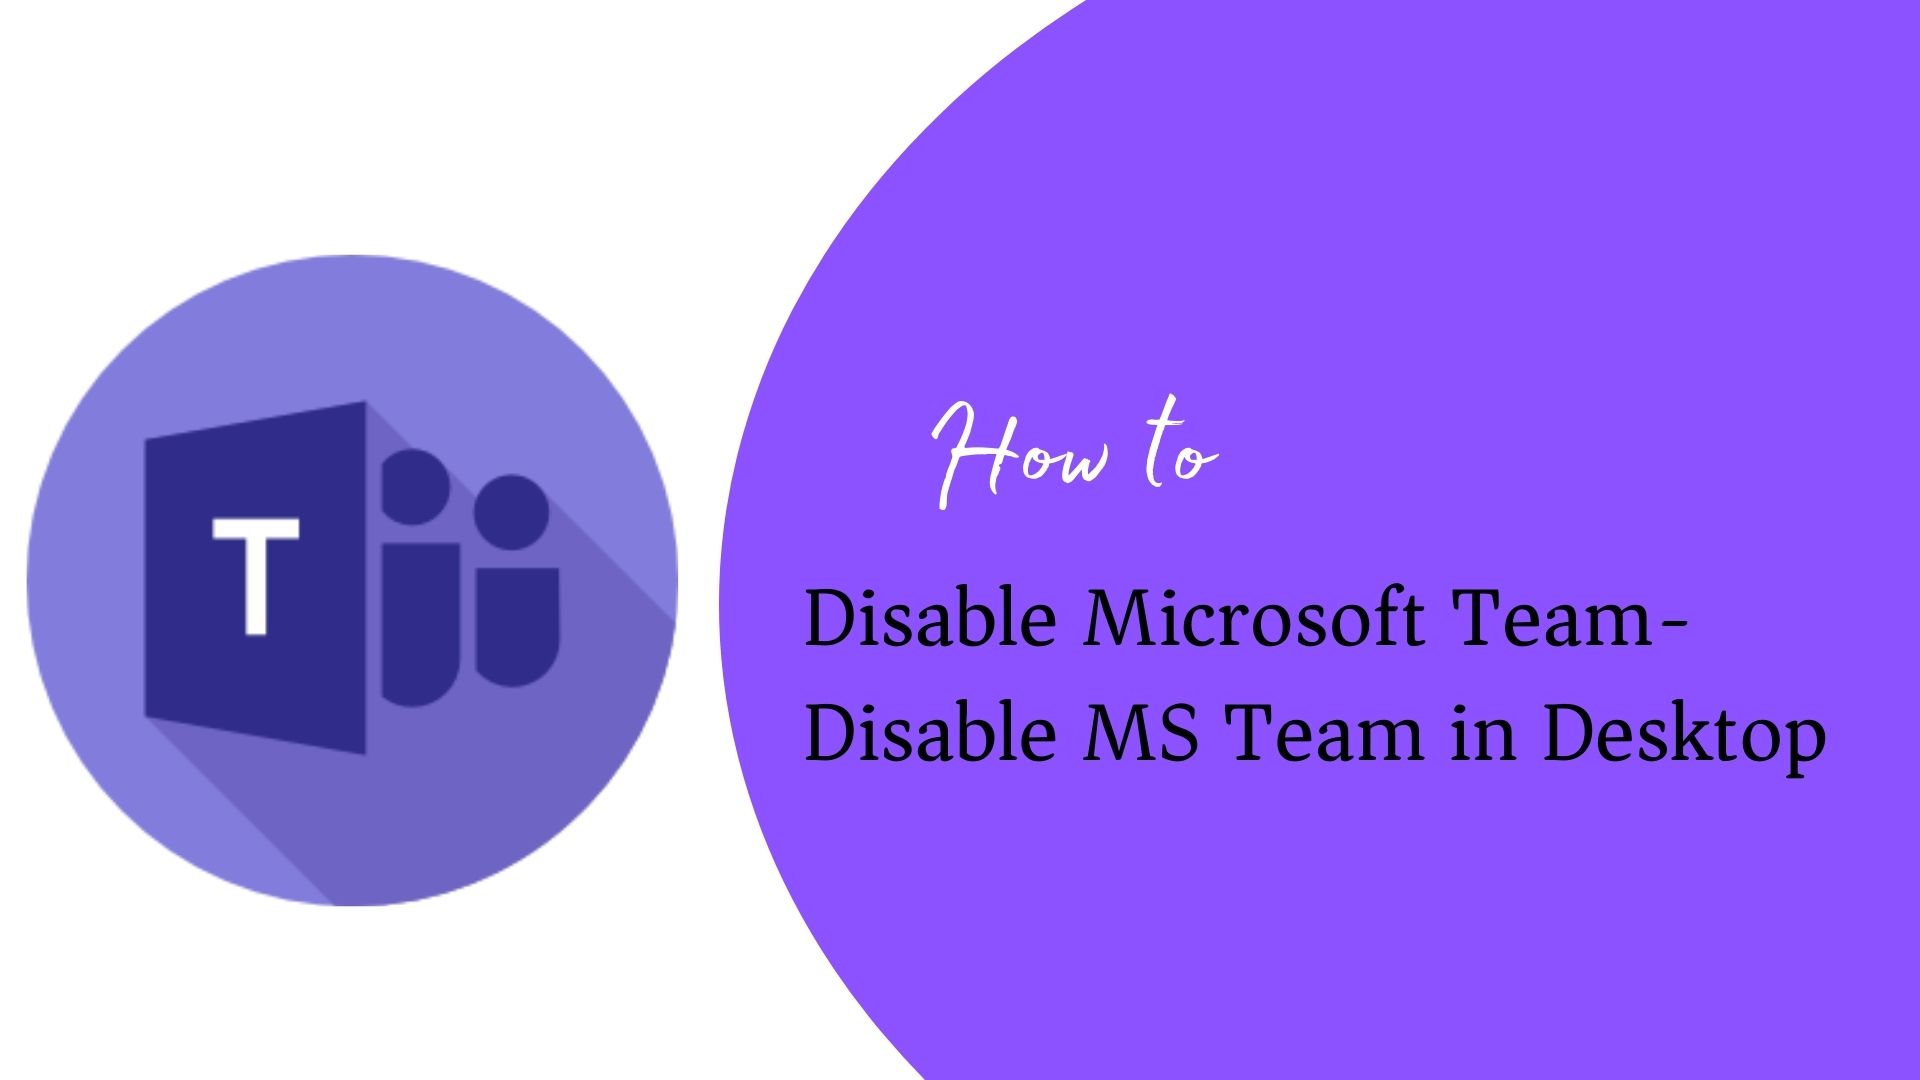 How to Disable Microsoft Team- Disable MS Team in Desktop